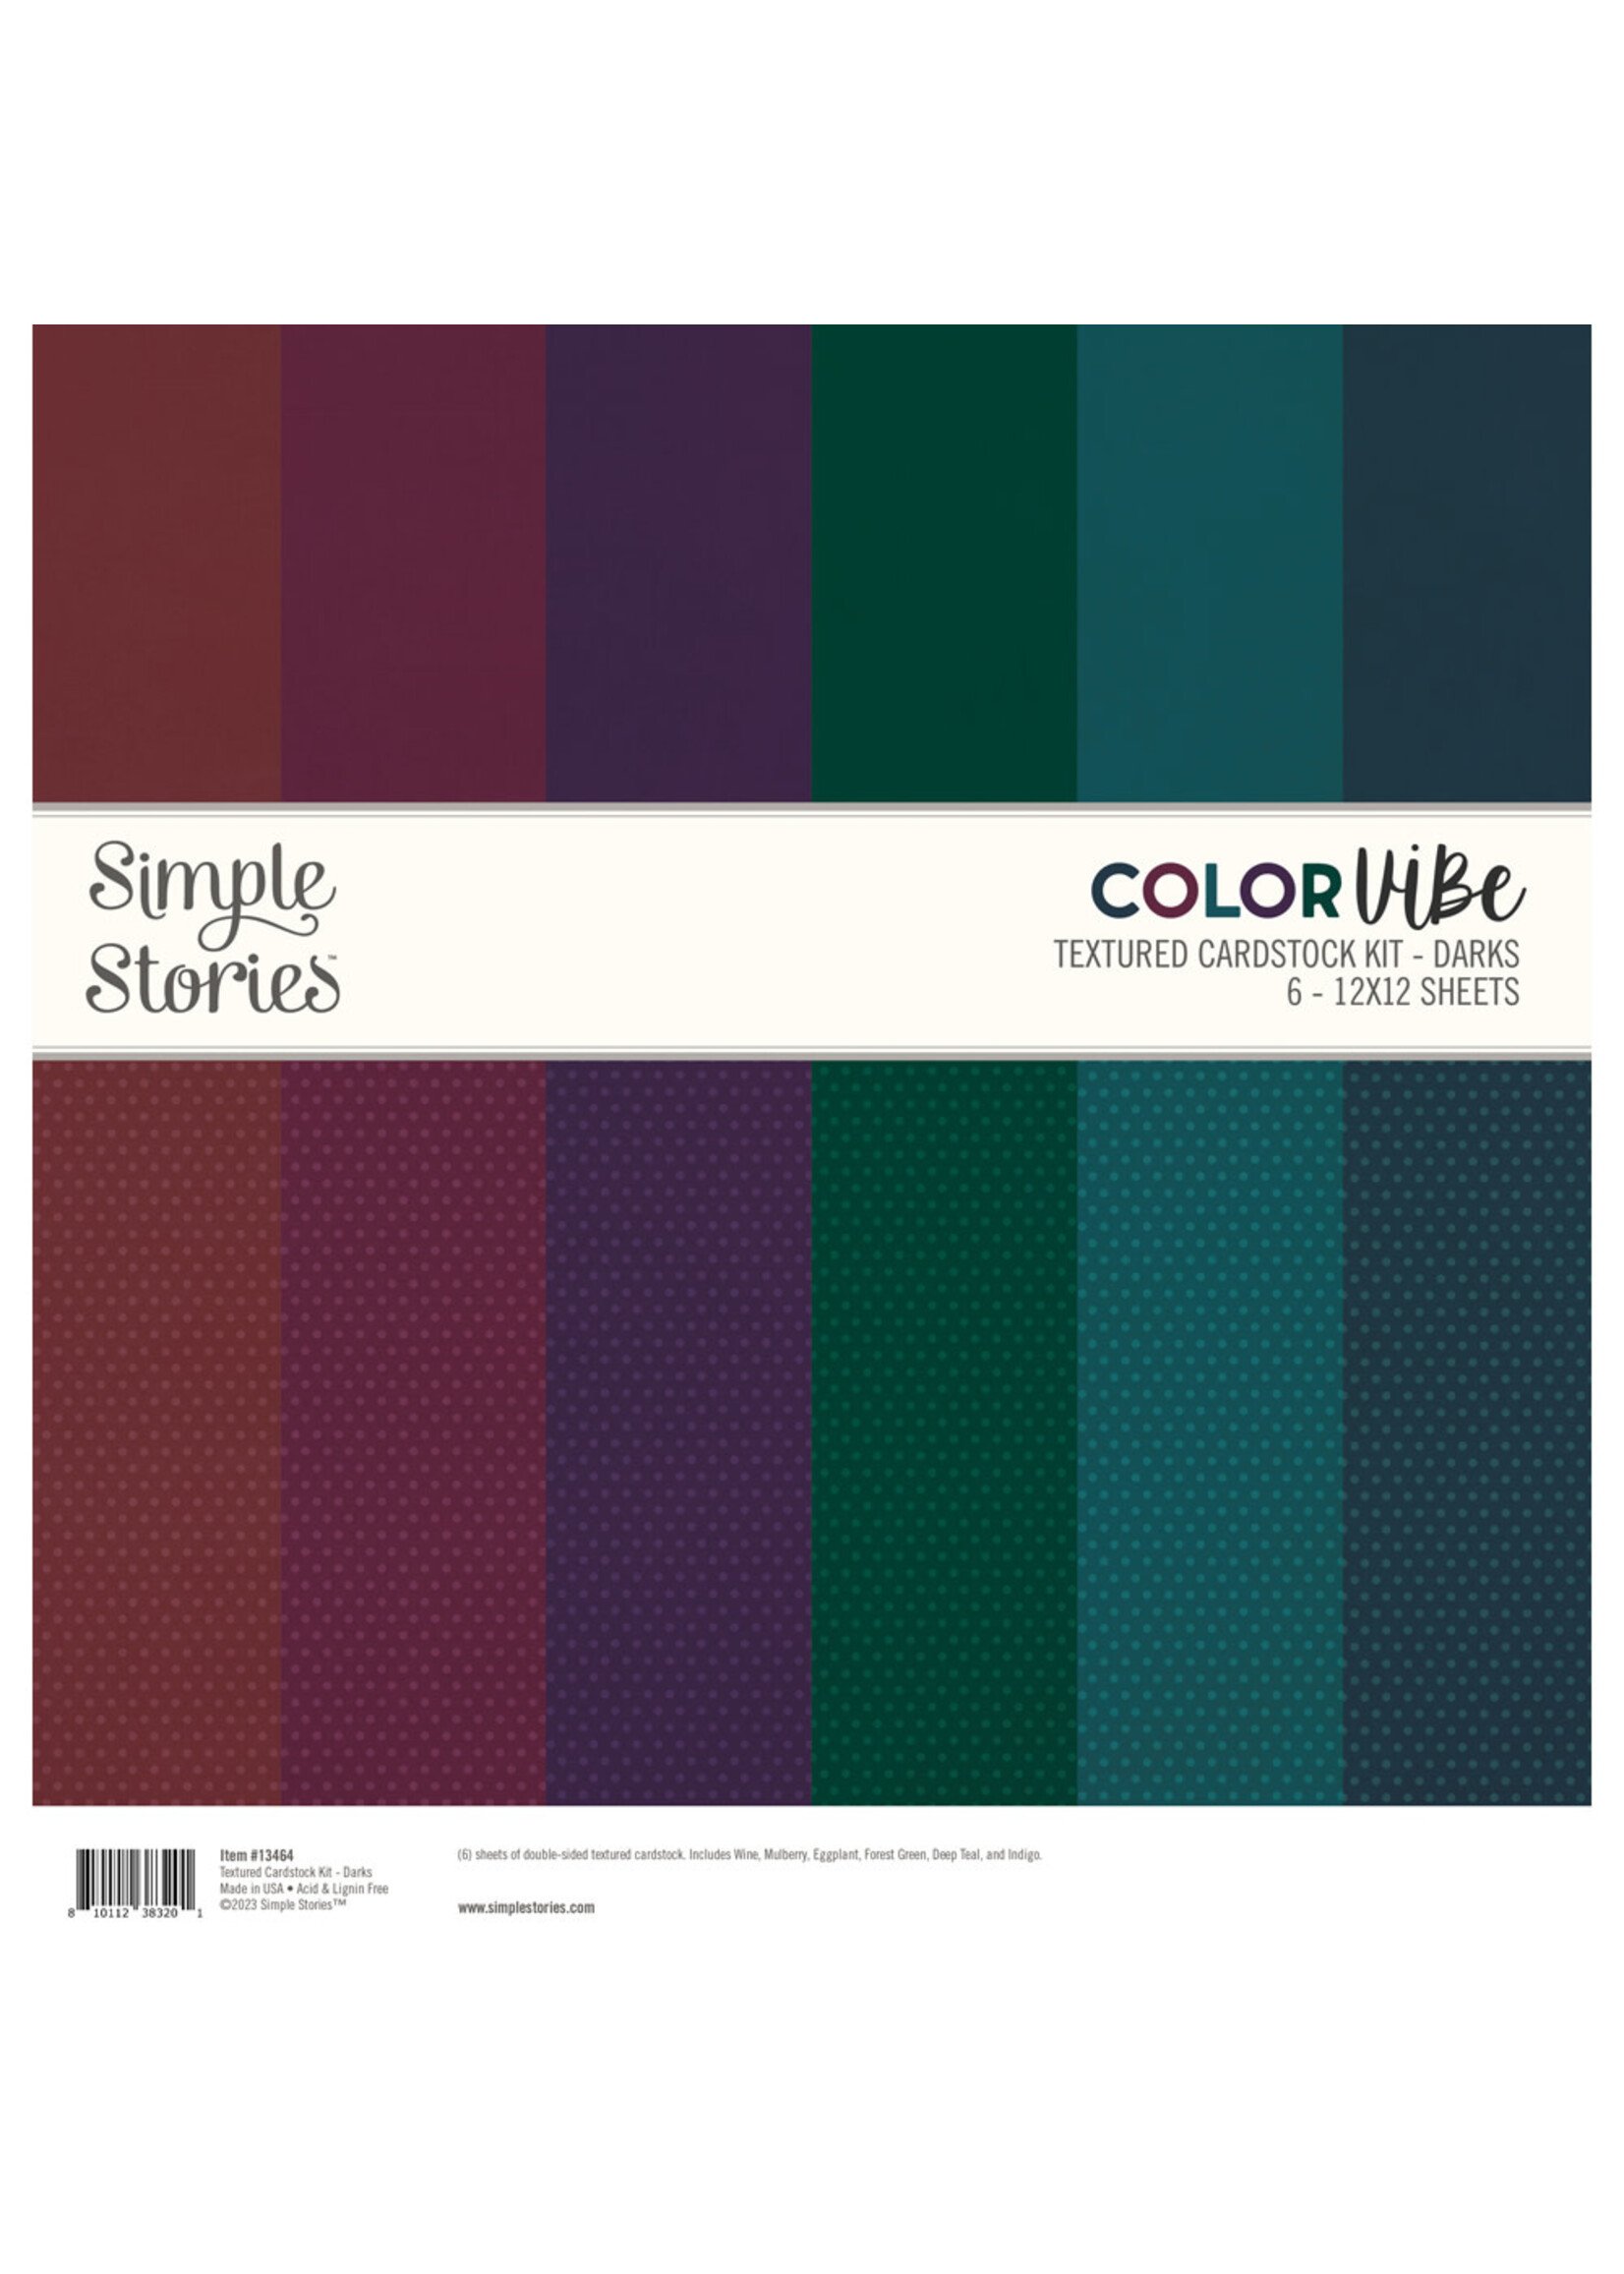 Simple Stories Color Vibe Textured Cardstock Kit - Darks